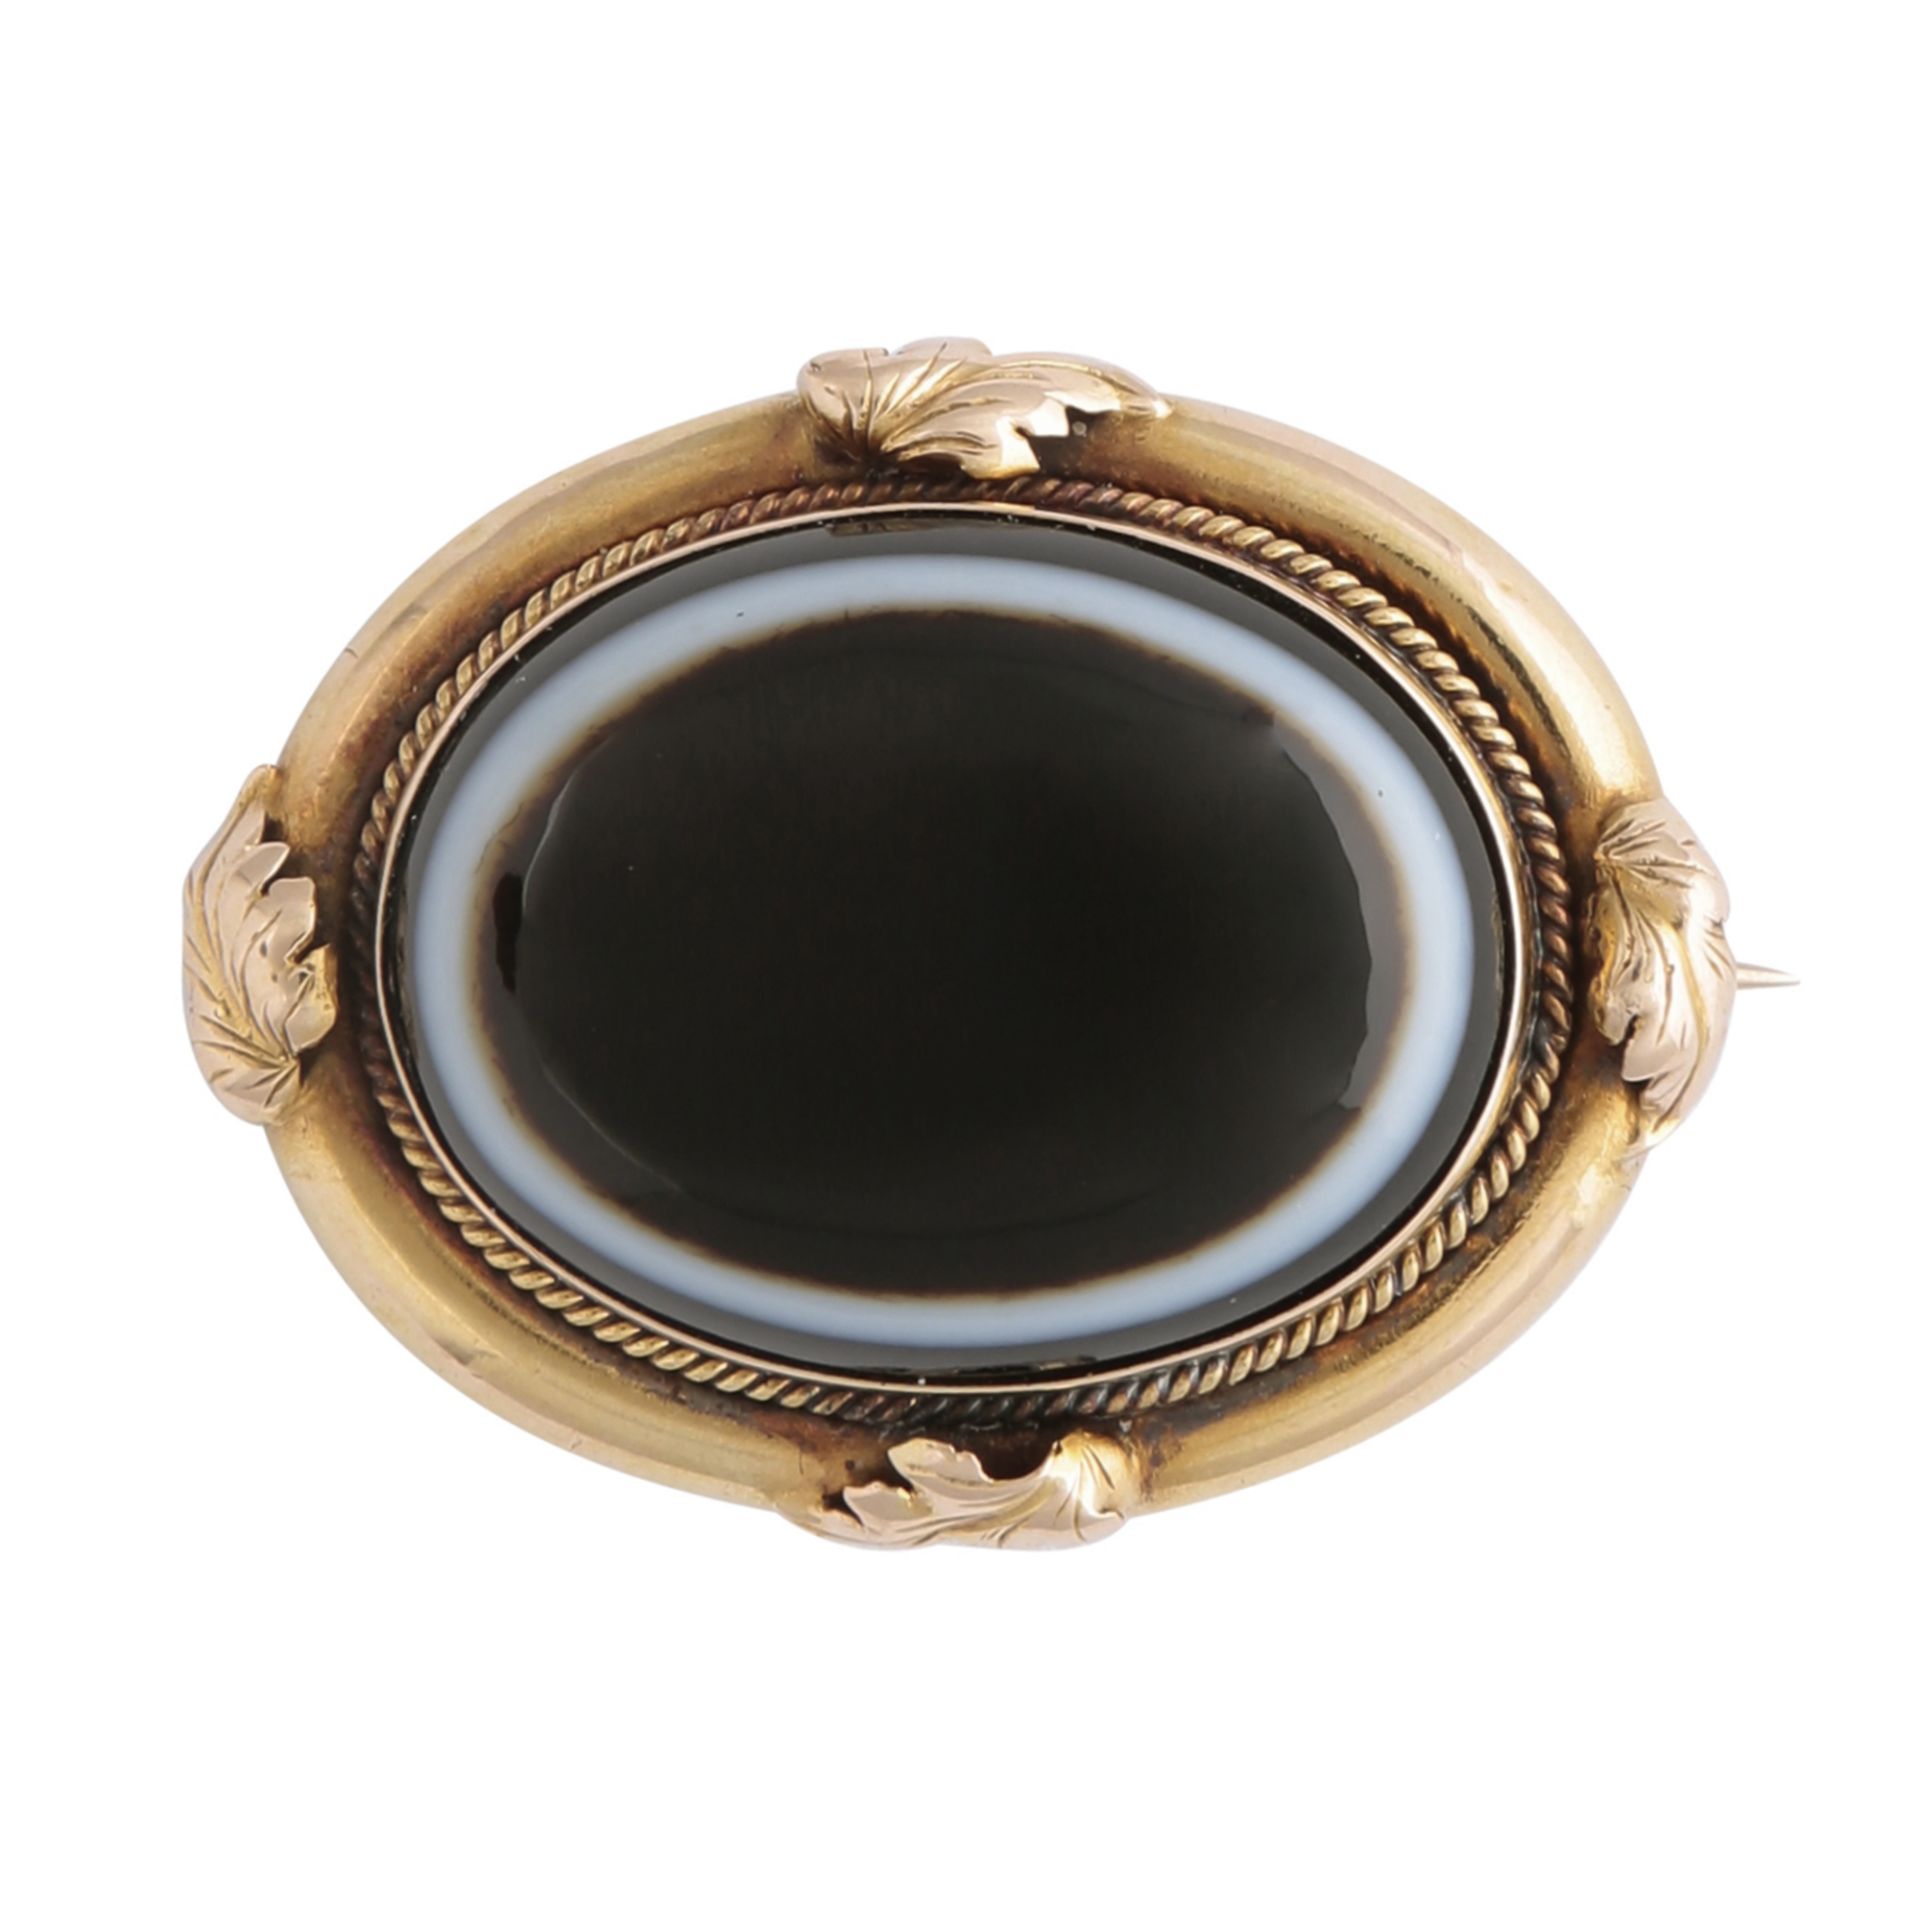 An antique Georgian / Victorian banded agate mourning brooch the large cabochon measuring 25x19mm,